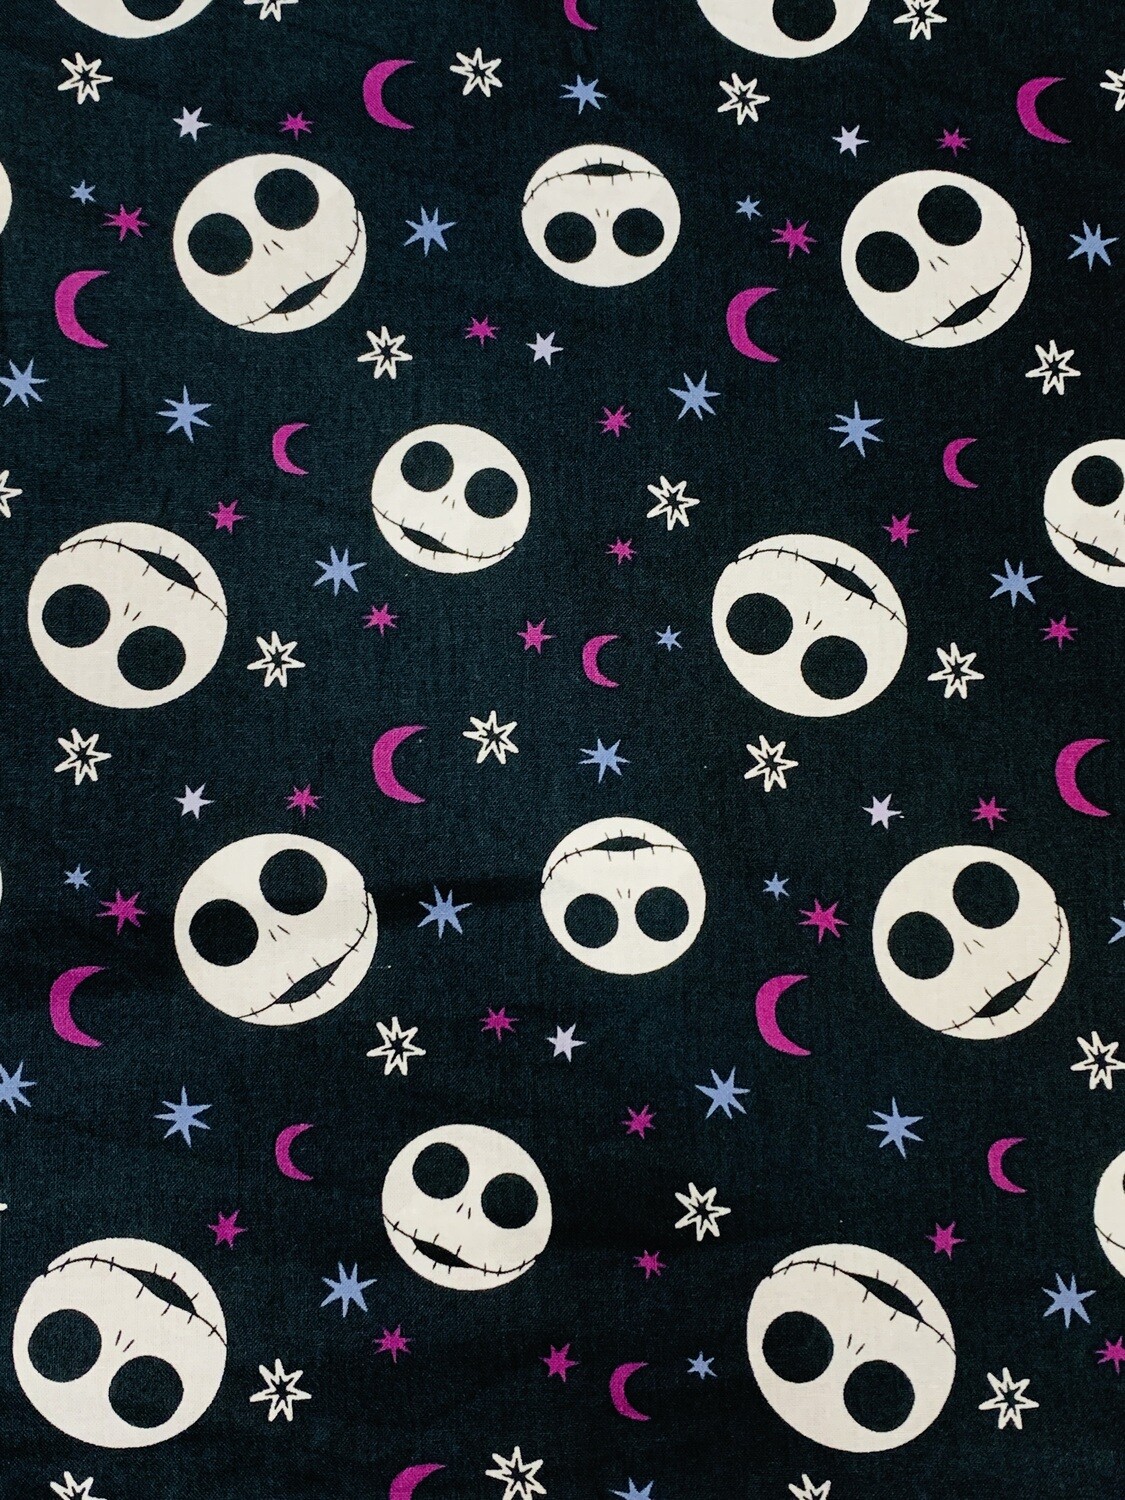 Jack Starlight Heads | Licensed Quilting Cotton | 112cm wide